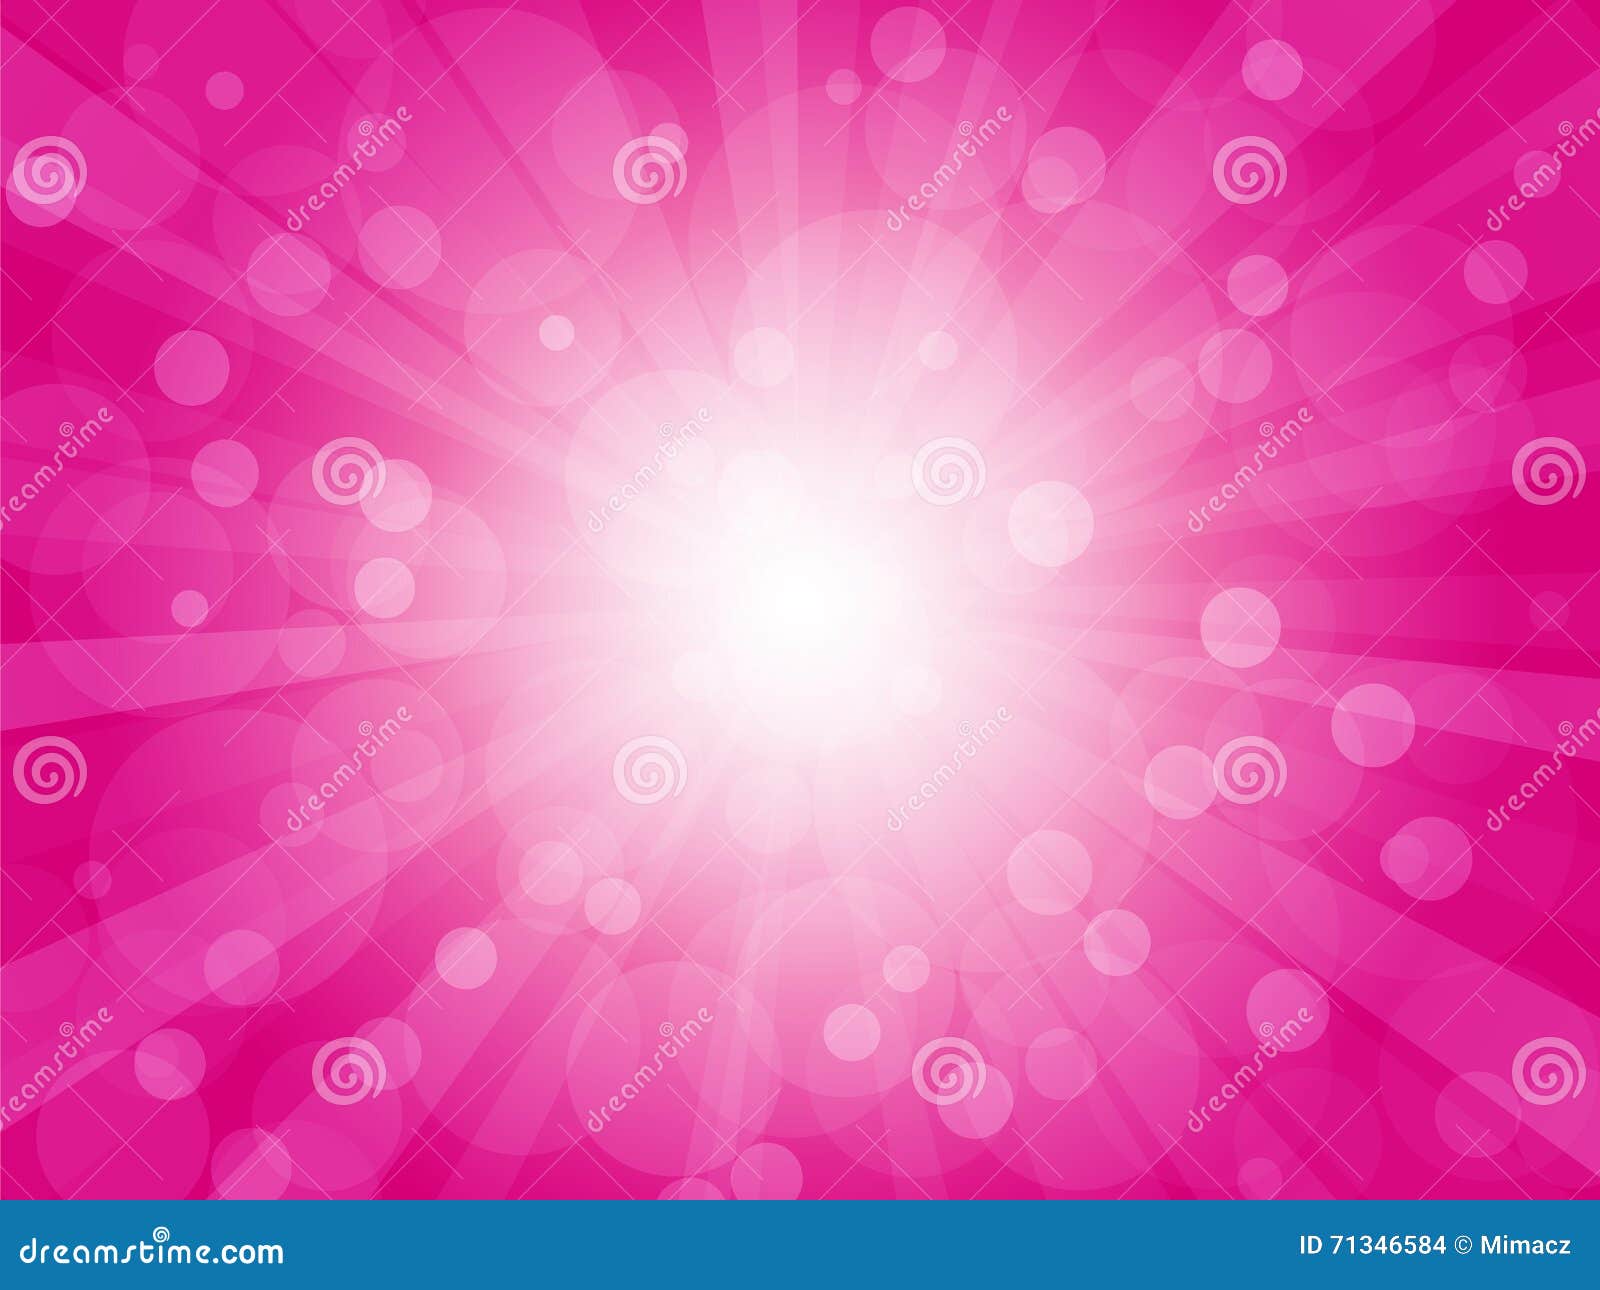 Brightly Pink Background with Rays Stock Vector - Illustration of flare,  modern: 71346584